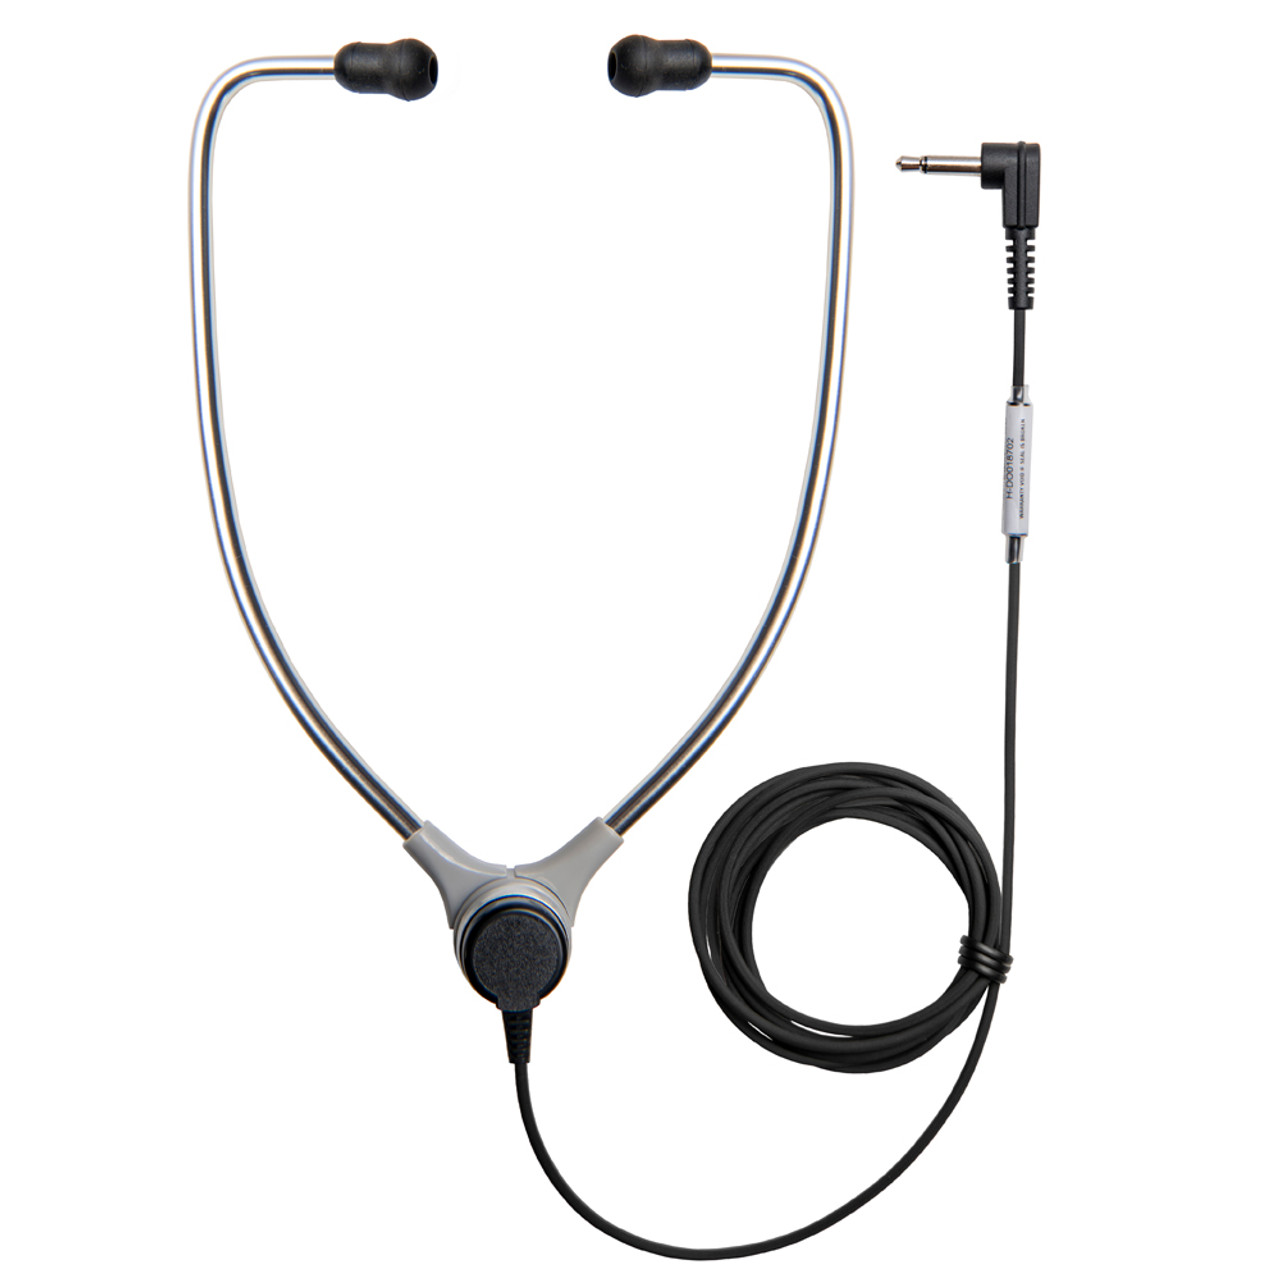 ECS AL-60 SAET Aluminum Stetho Style Headset With Soft Antimicrobial Eartips